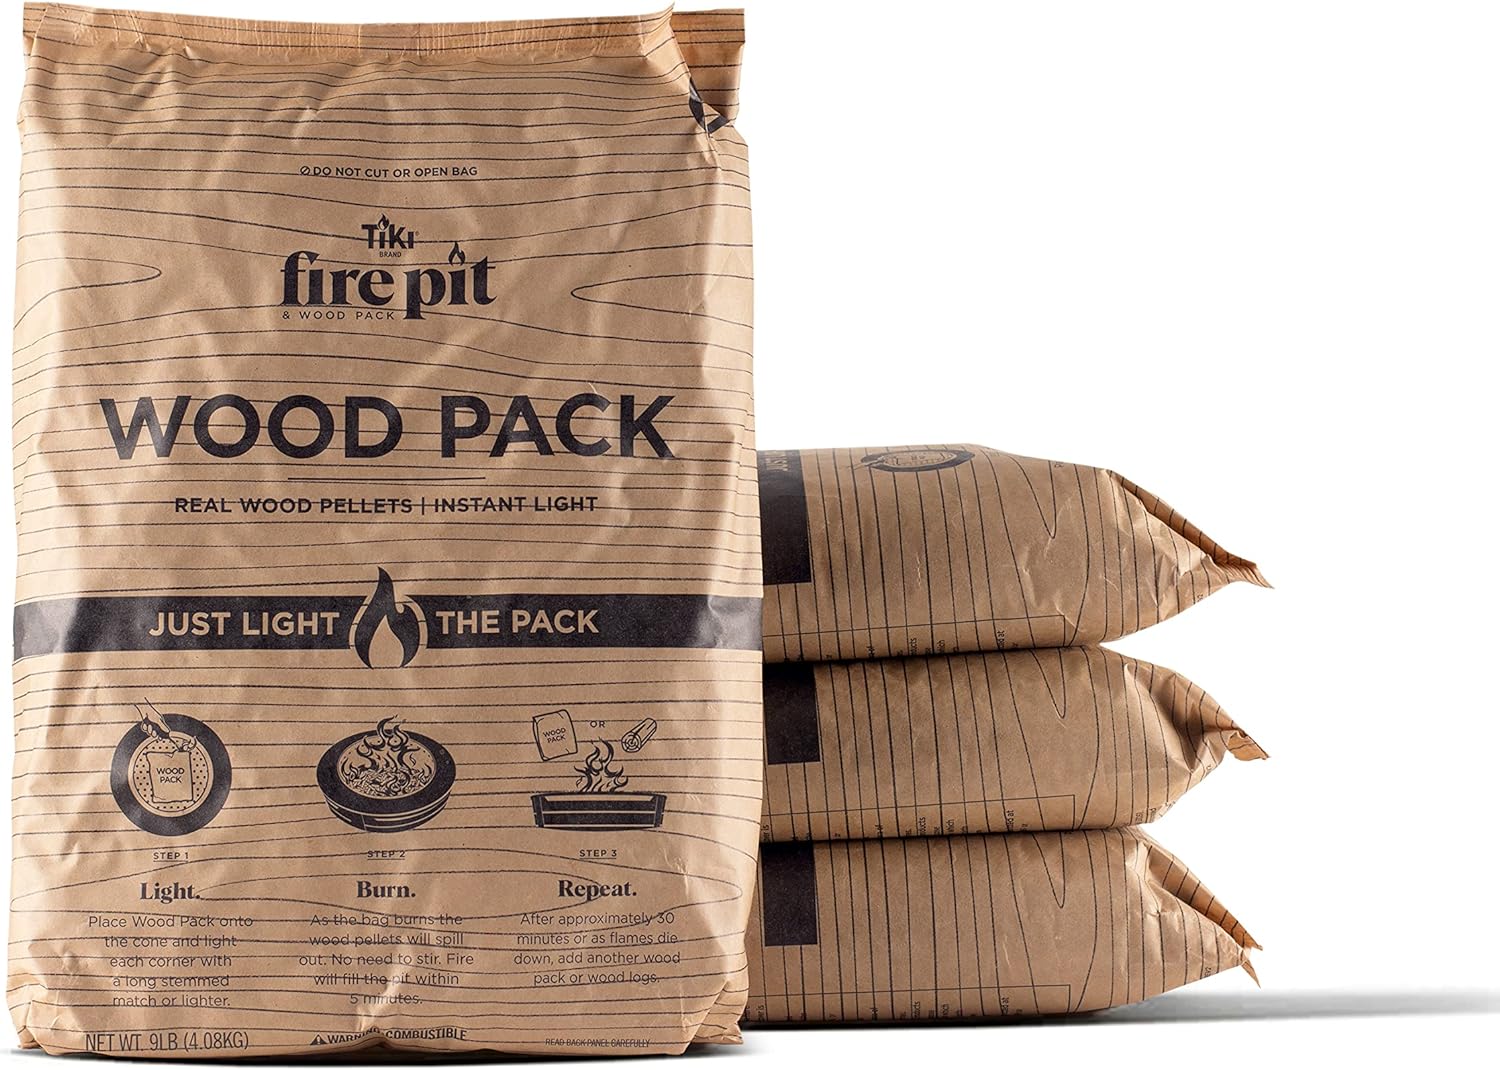 TIKI Brand Wood Packs - 4-Pack, Wood Pellets For Smokeless Outdoor Fire Pits, Wood Fuel Pellets, Easy Instant Fire For 30+ Minute Burn, 17 x 11.5 x 3.5 Inches, 121913568